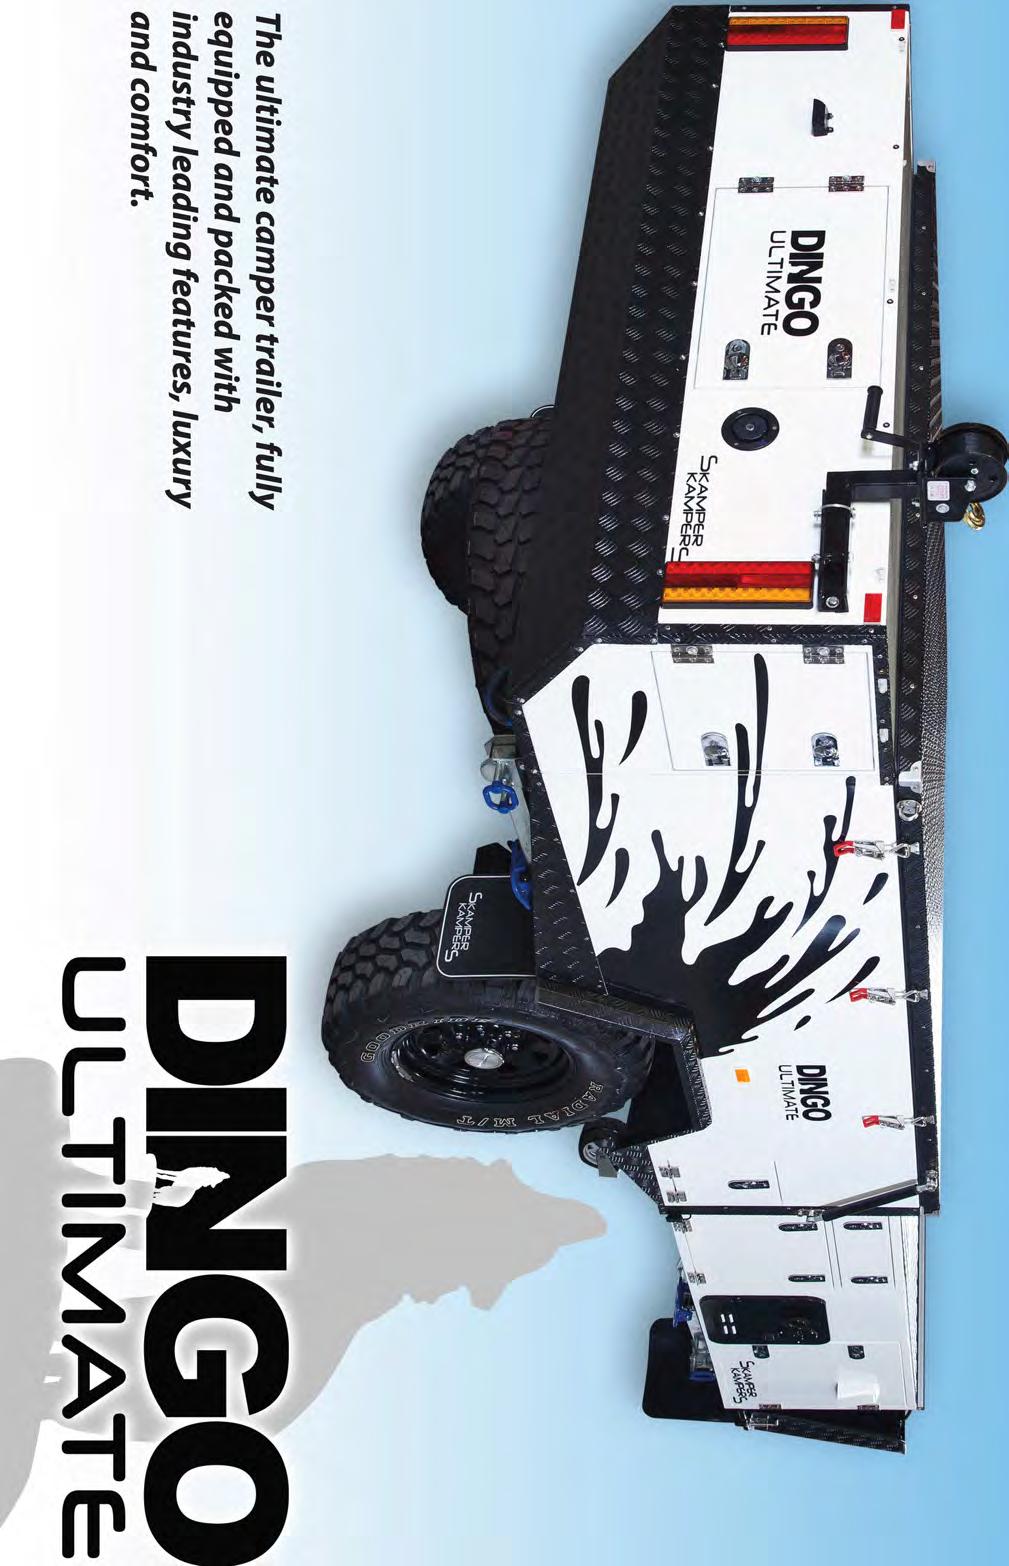 Dingo Ultimate: Specifications & Standard Features Iii Galvanised Chassis 100x50x4mm Iii 5 Year Structural Warranty on Chassis Iii Adjustable, Heavy Duty Independent